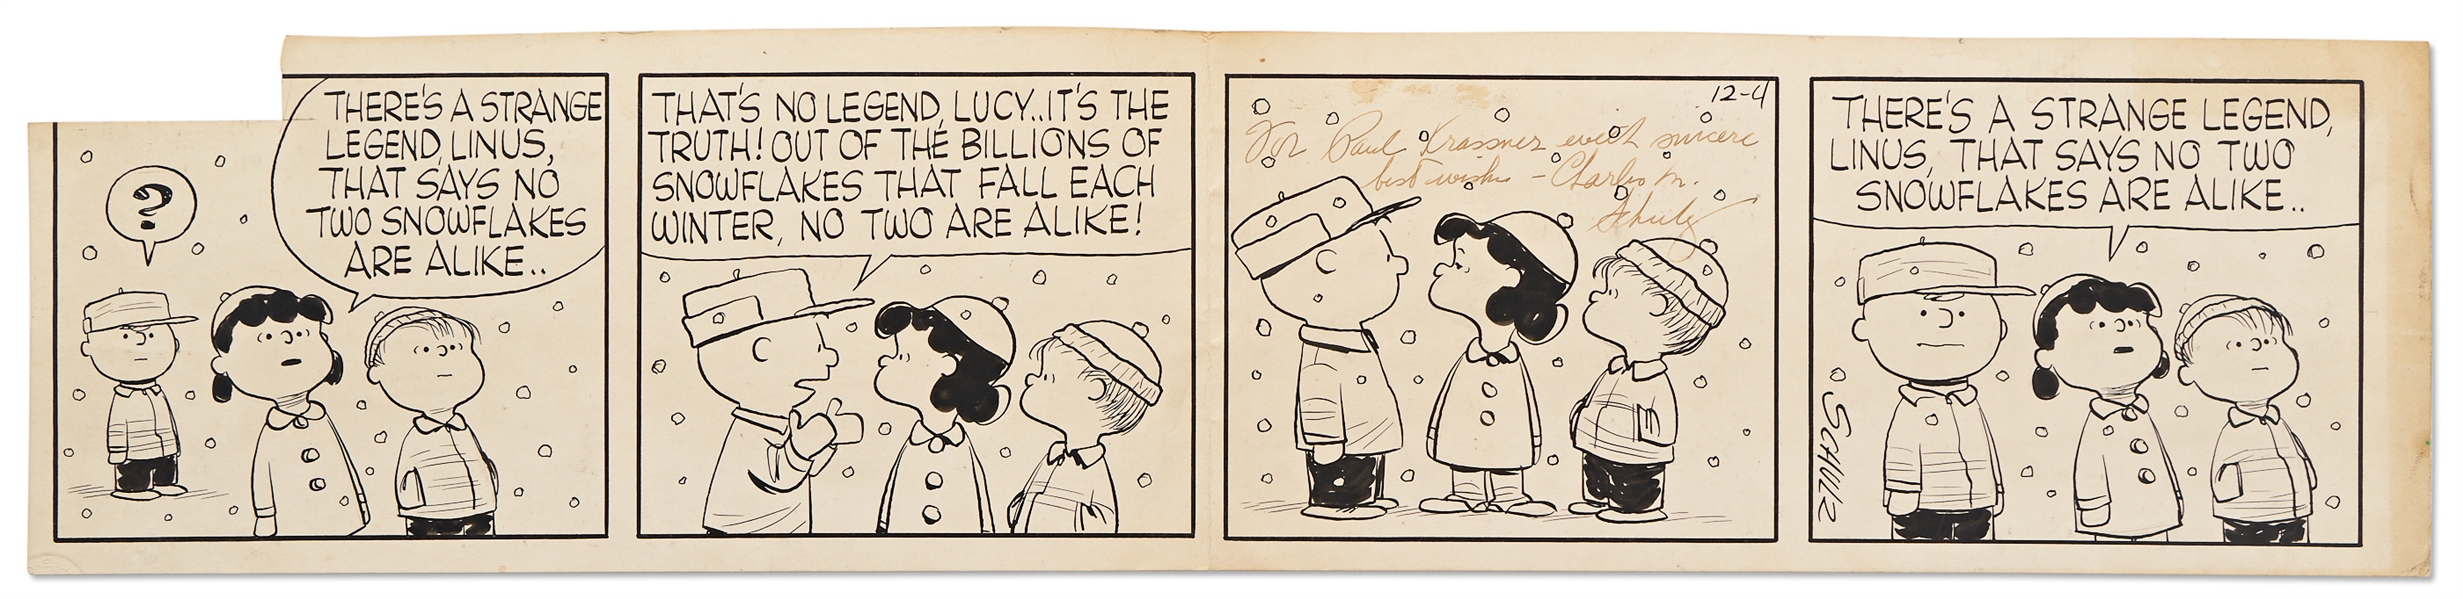 Early 1956 ''Peanuts'' Comic Strip Hand-Drawn by Charles Schulz